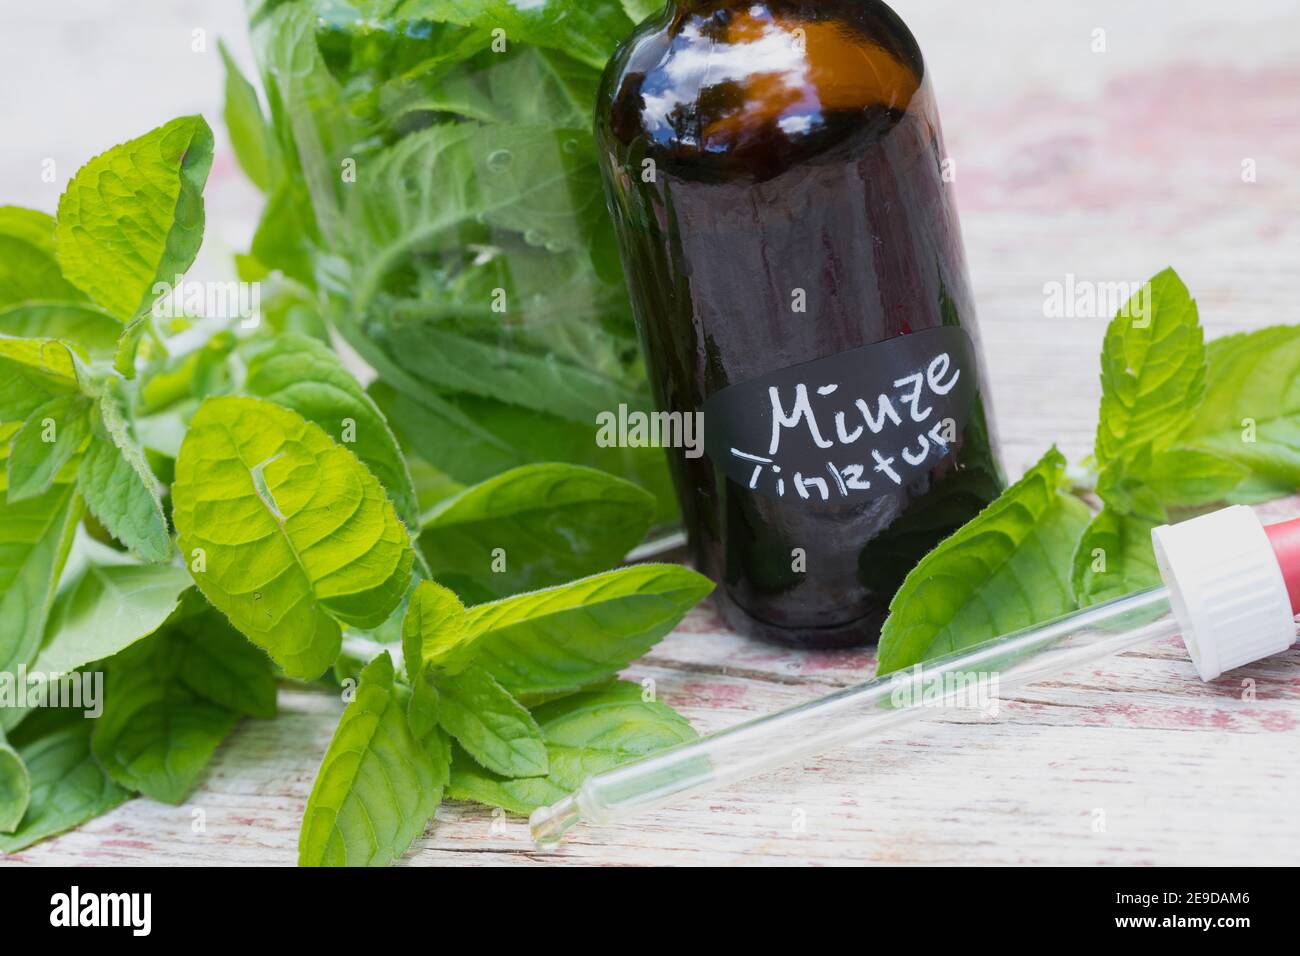 Wild water mint, Water mint, Horse mint (Mentha aquatica), selfmade water mint tincture, Germany Stock Photo